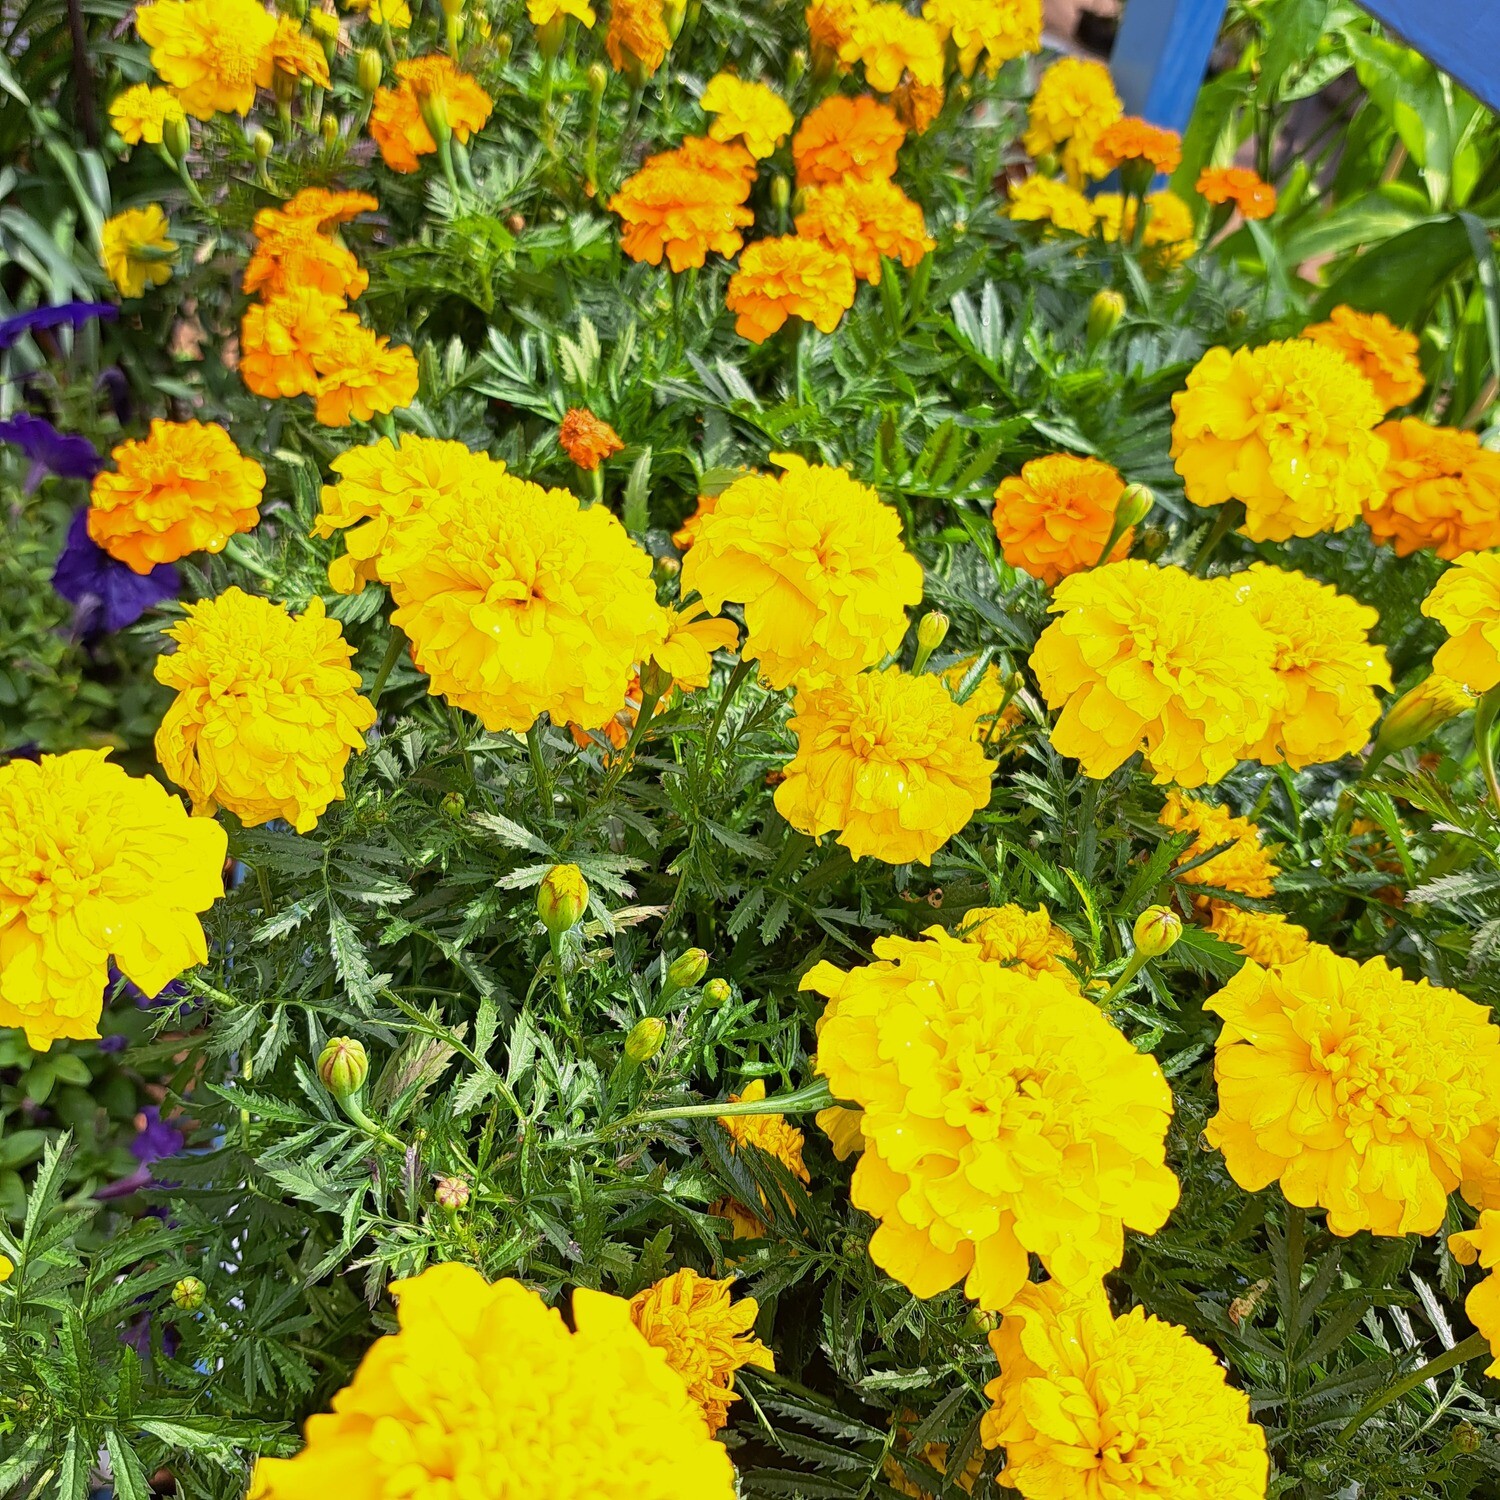 Marigold Mixed Colours Seedlings 30 Pack